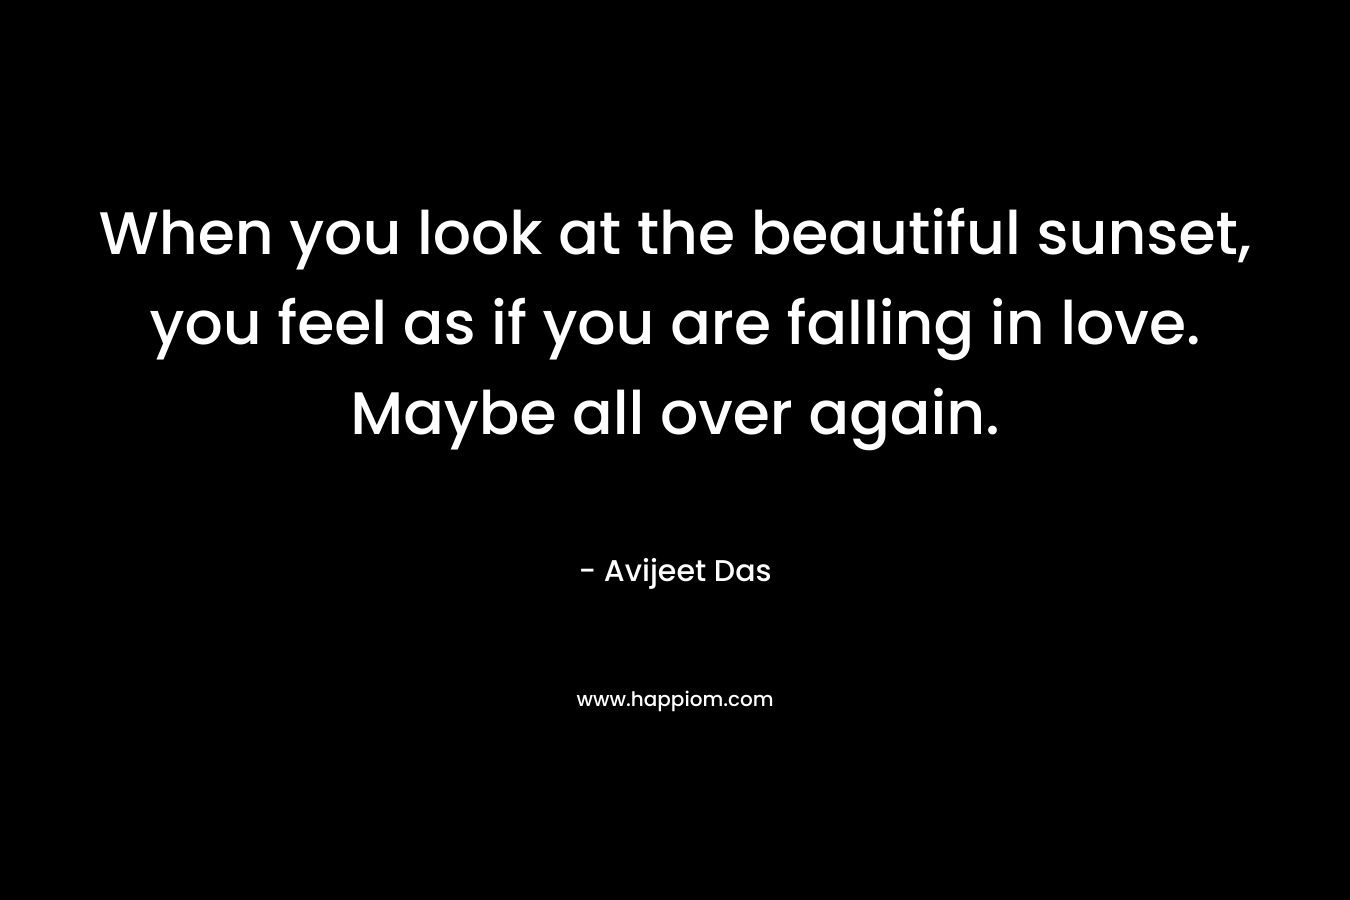 When you look at the beautiful sunset, you feel as if you are falling in love. Maybe all over again. – Avijeet Das